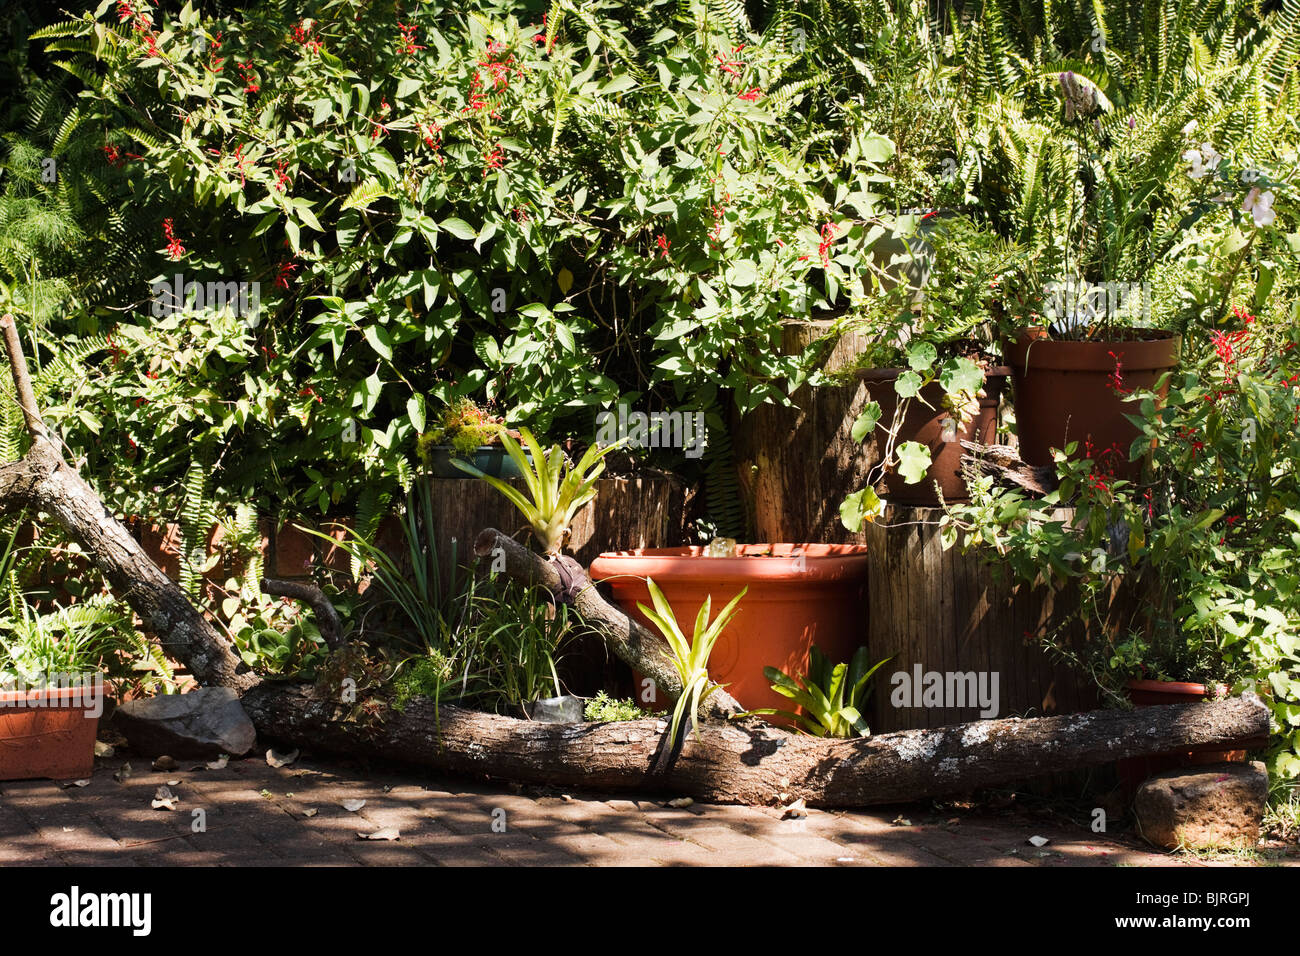 Pot plants, log, rocks and water feature make up a container garden in a corner of a paved patio. Stock Photo